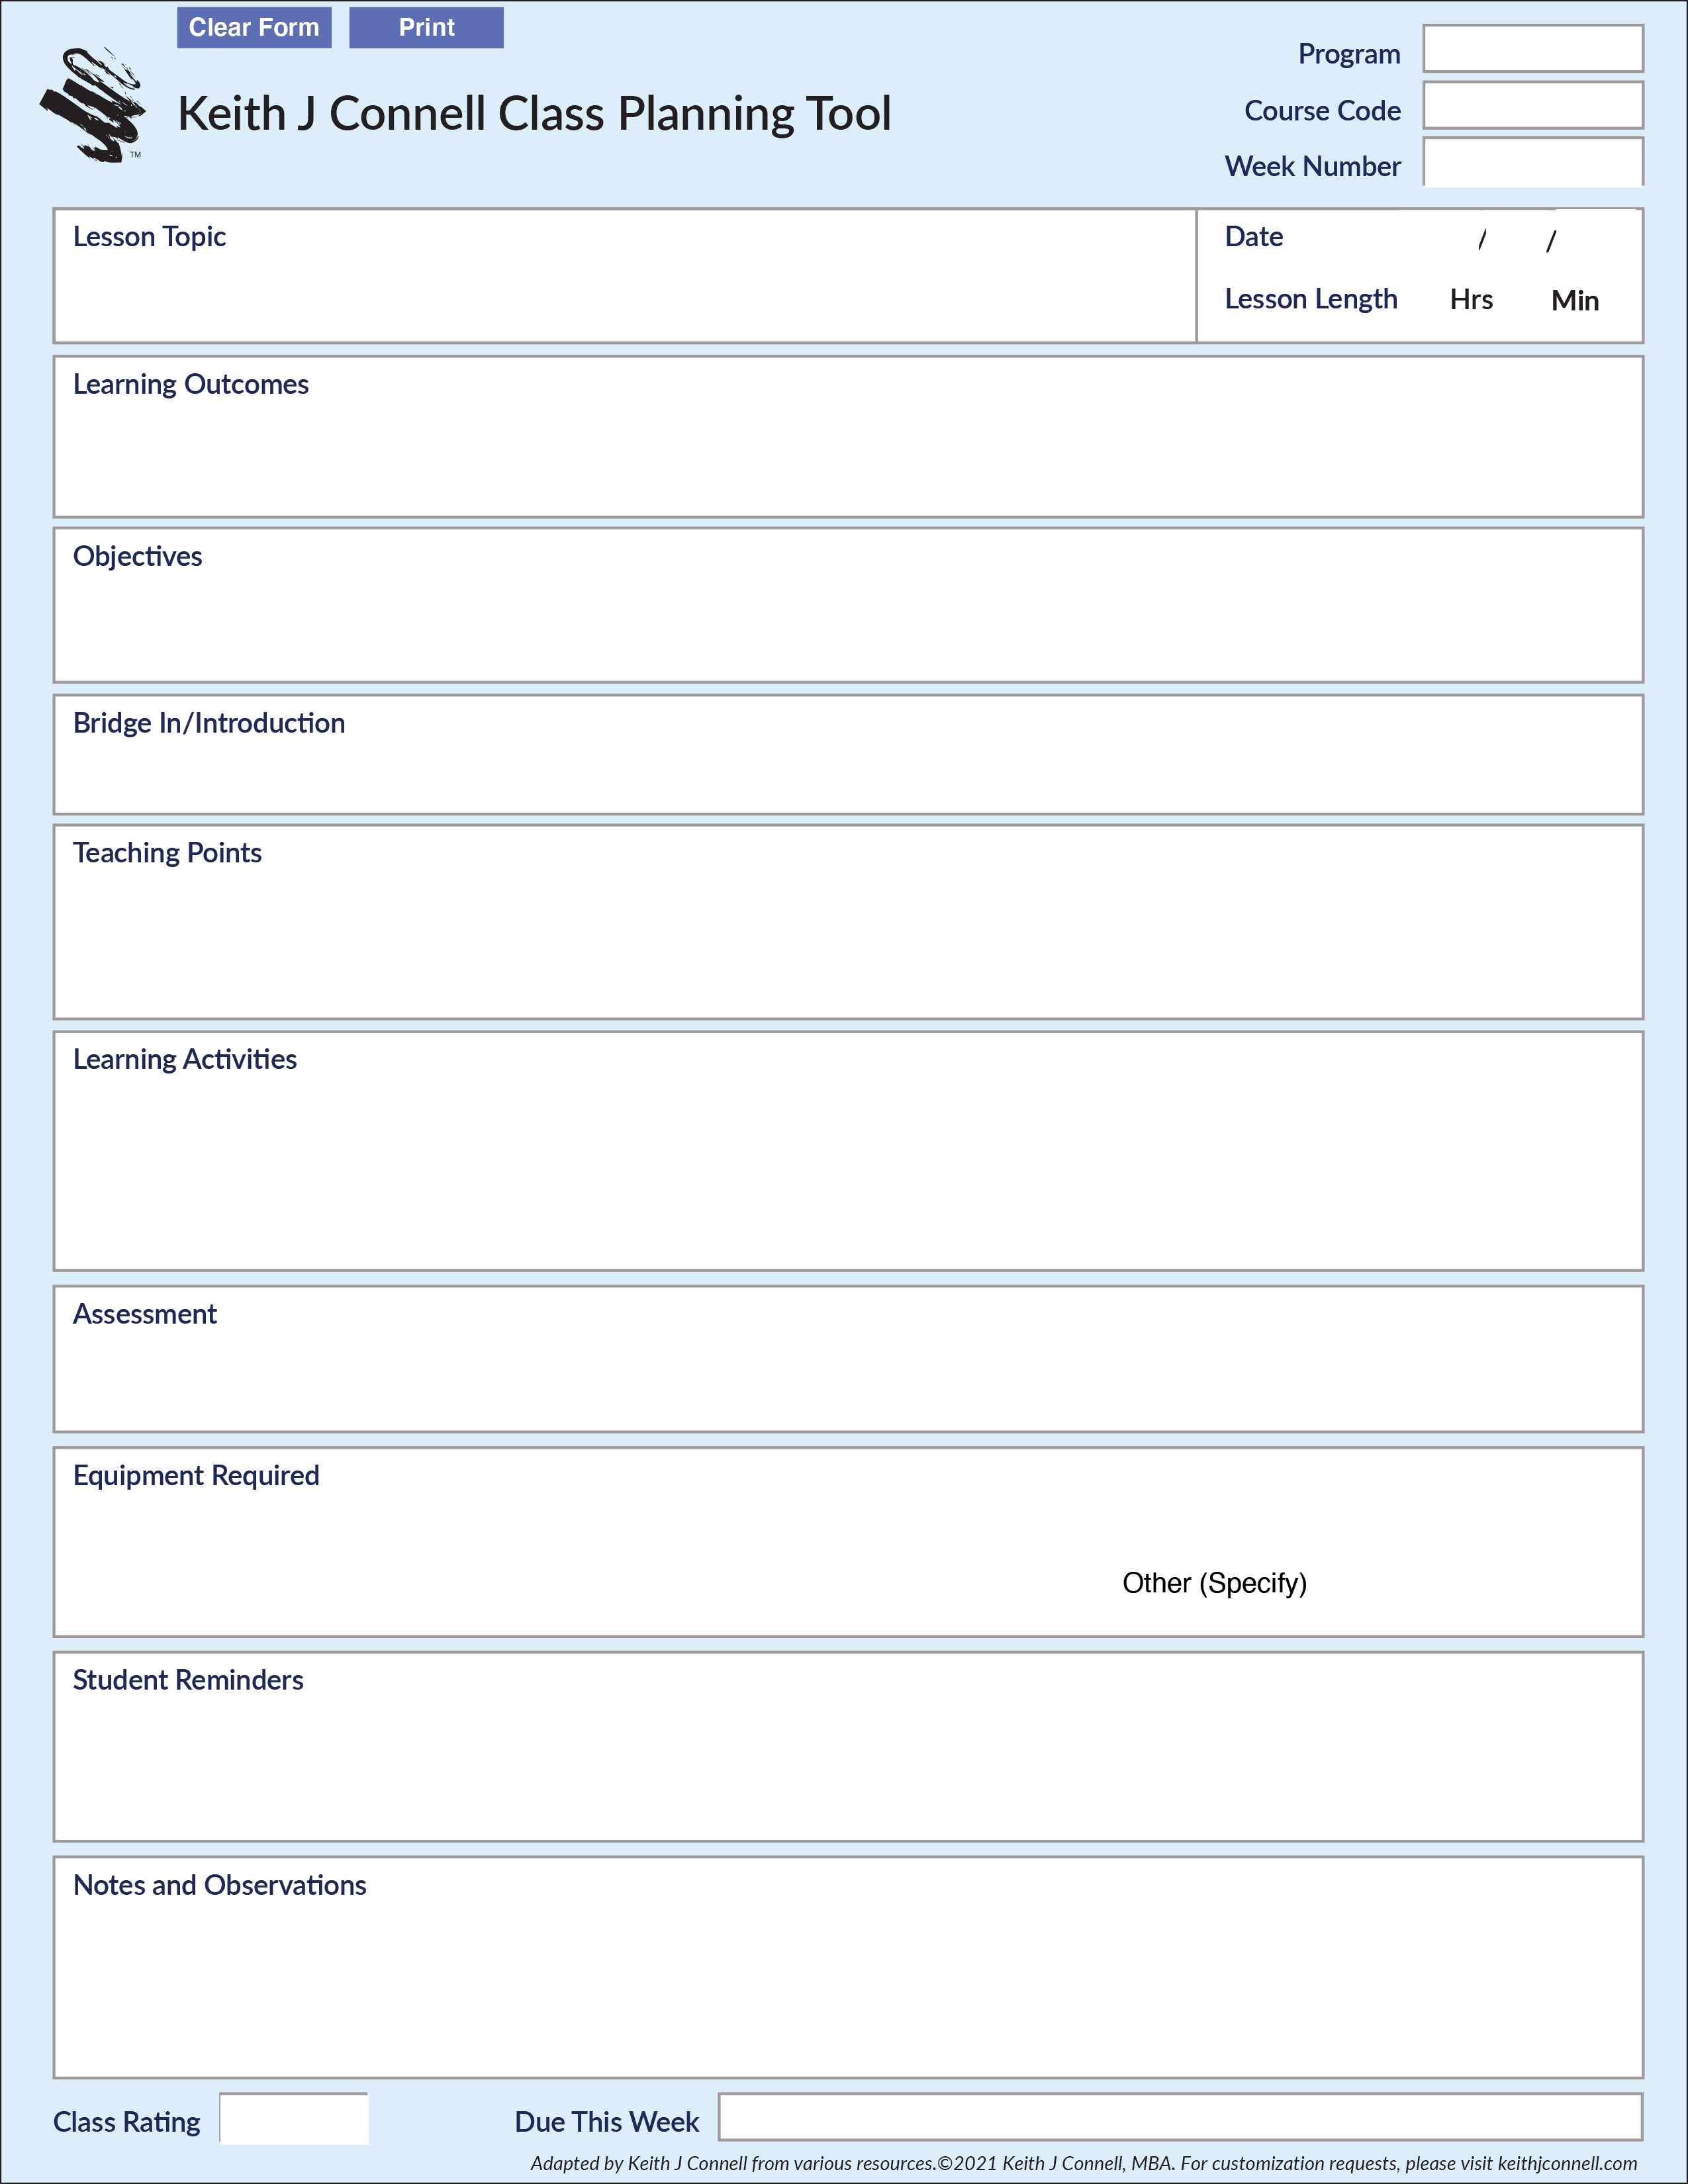 Image of the weekly class planning tool designed by Keith J Connell. This form offers the instructor an opportunity to plan learning activities, and teaching points and also allows for observations of the class in general.